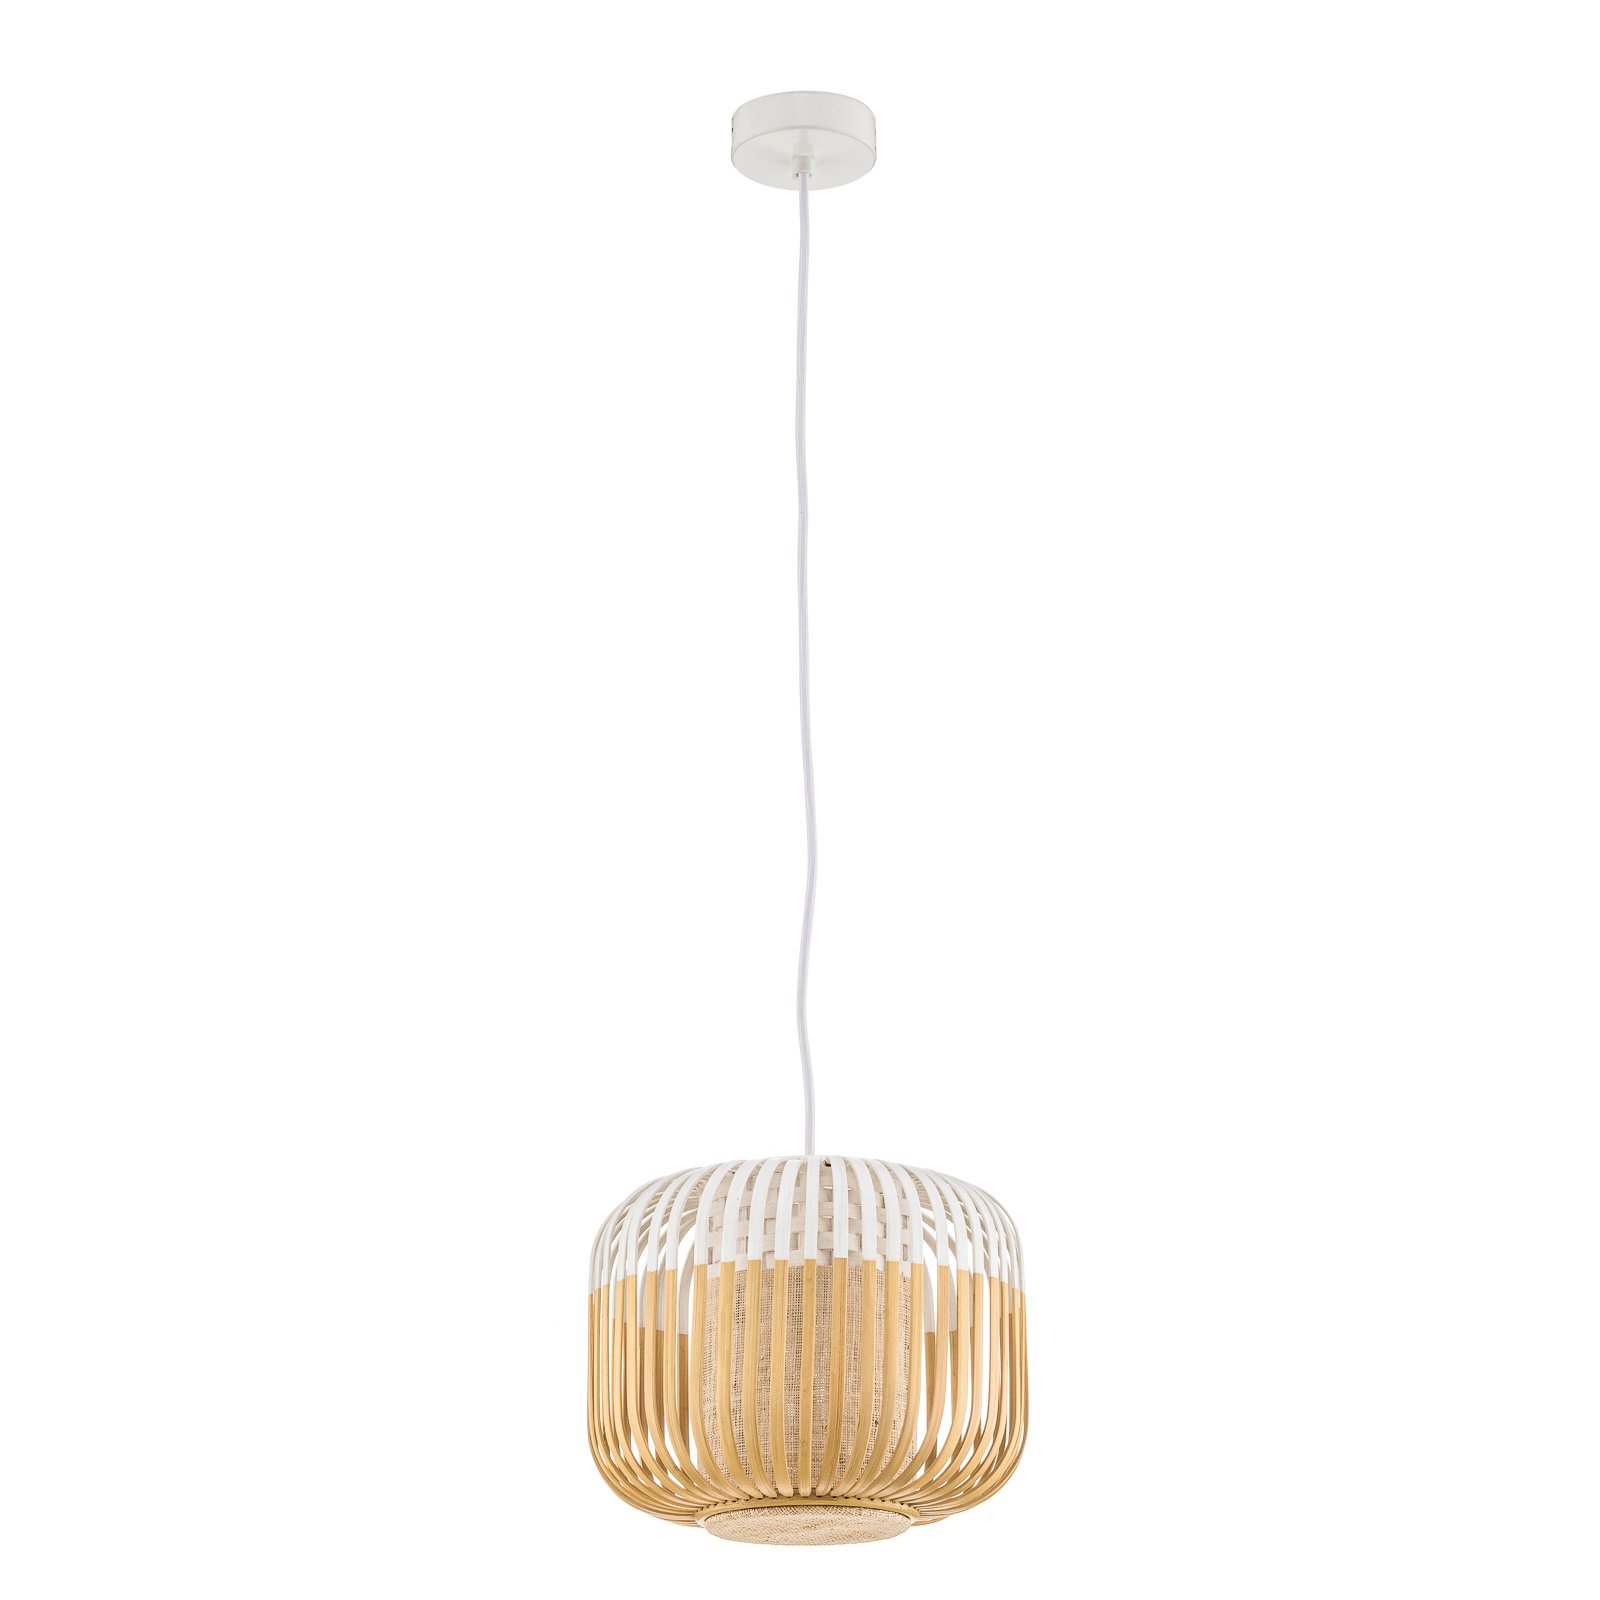 Forestier Bamboo Light XS suspension 27 cm blanche